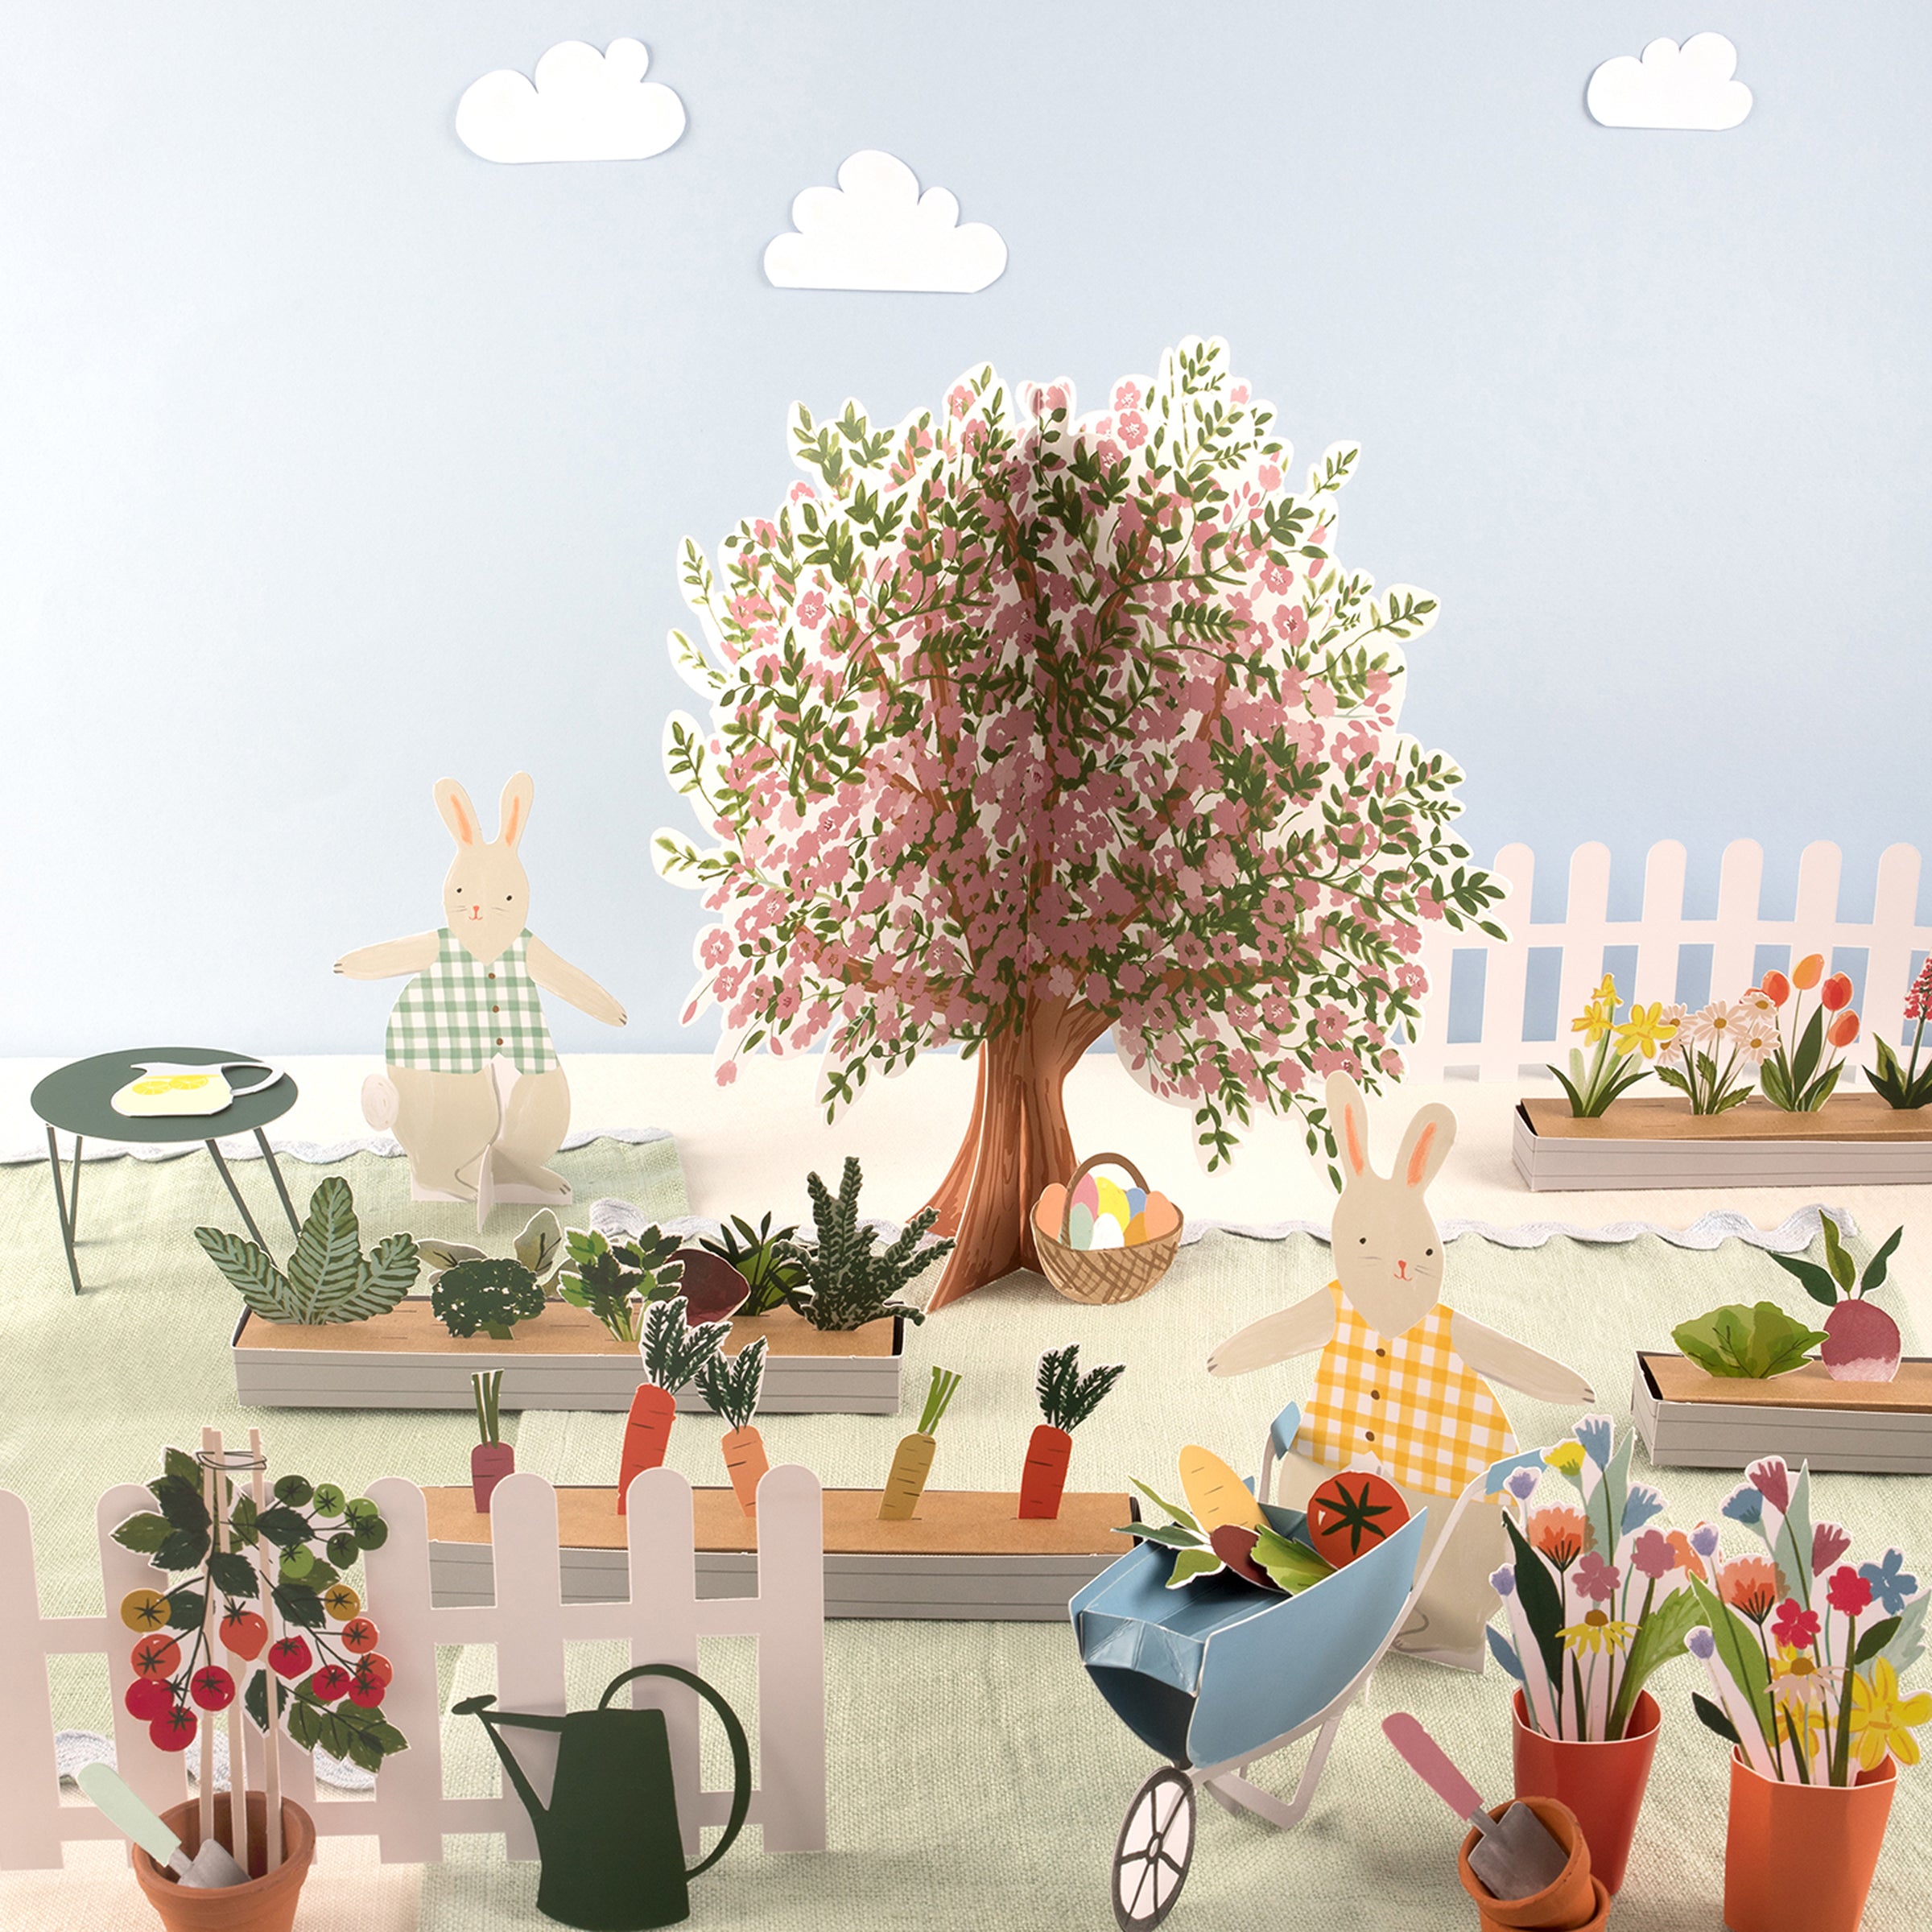 Our bunny play garden is a wonderful creative gift for kids, perfect for Easter crafts.